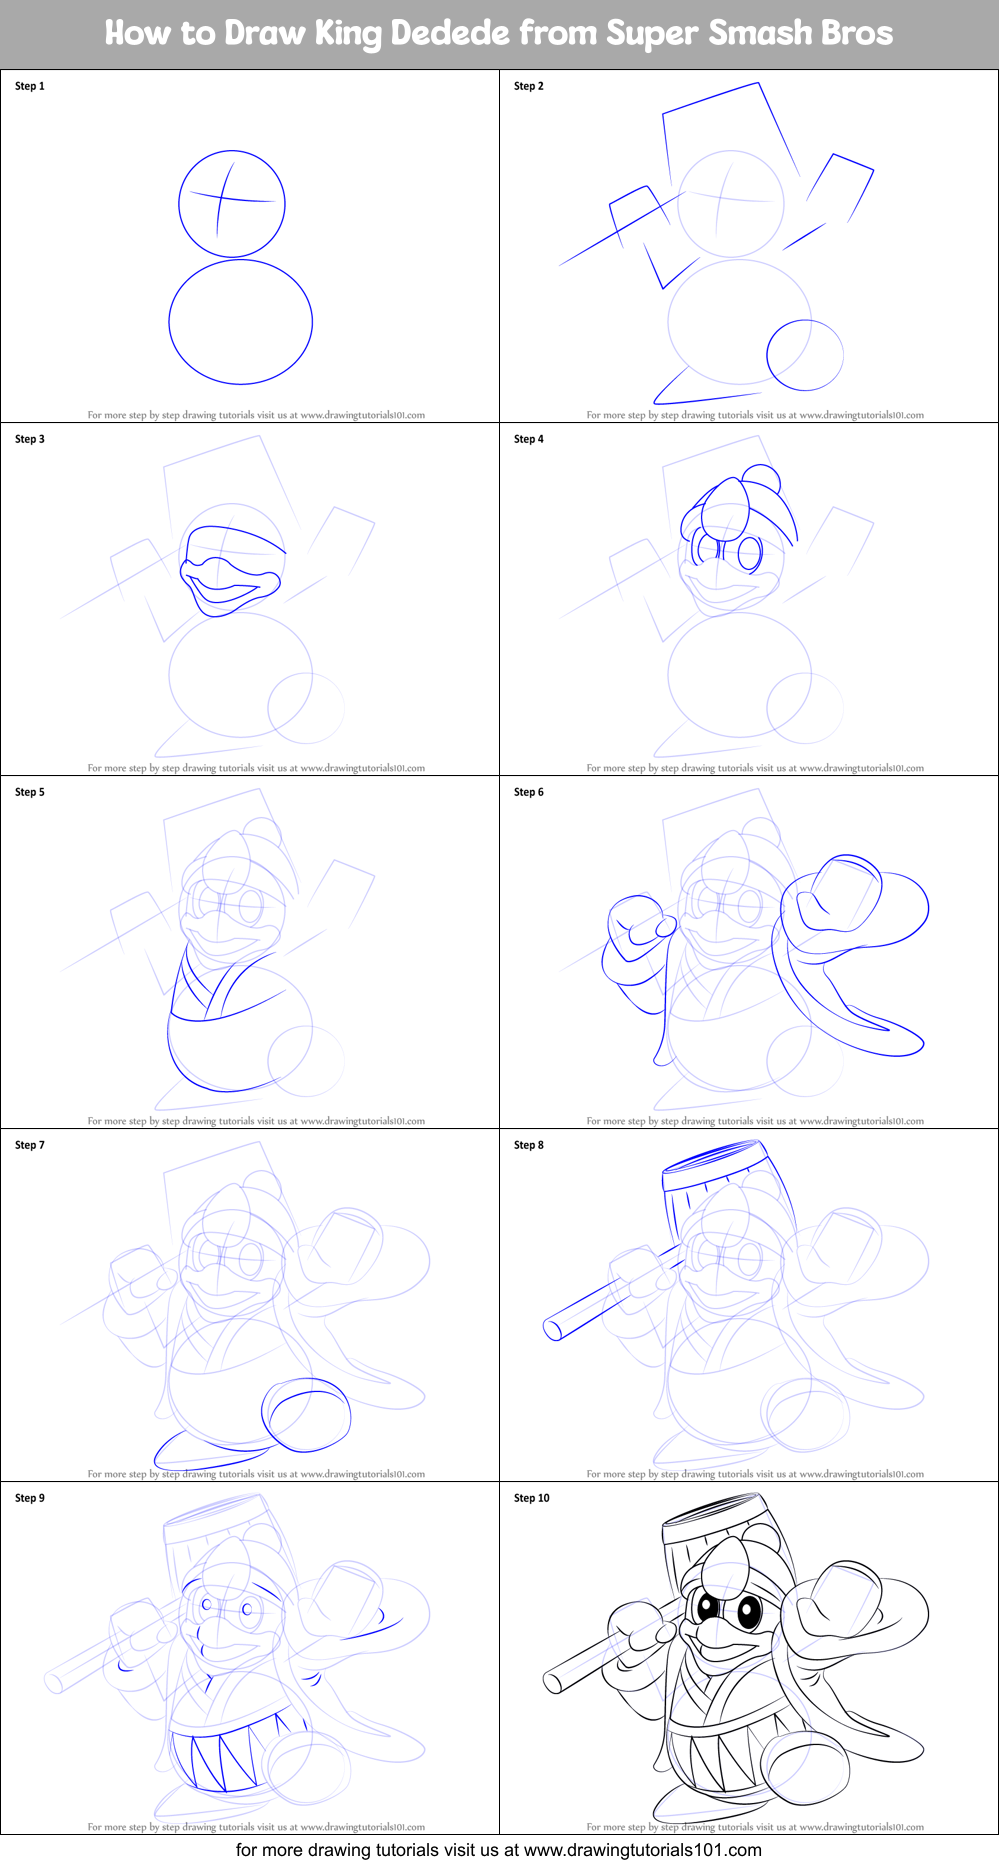 How to Draw King Dedede from Super Smash Bros printable step by step